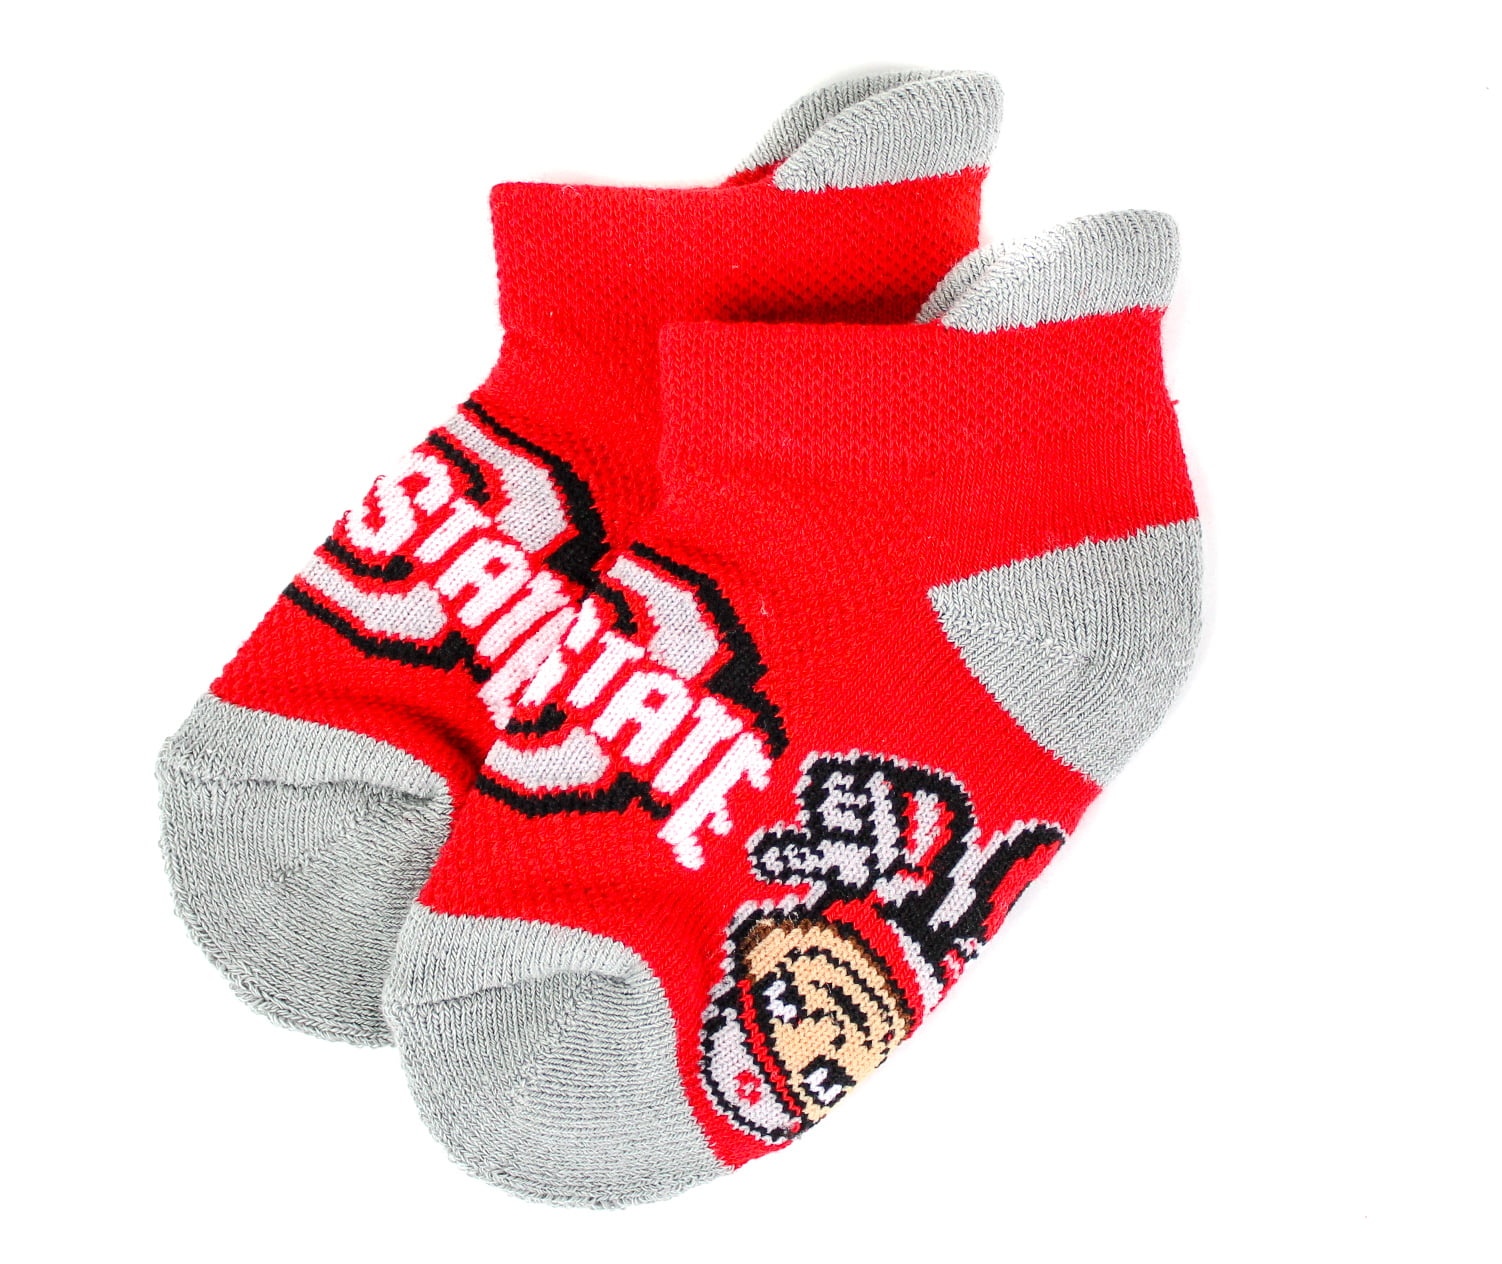 Ohio State Buckeyes POLY KNIT Infant Newborn Baby Booties Slippers Shower Gift 